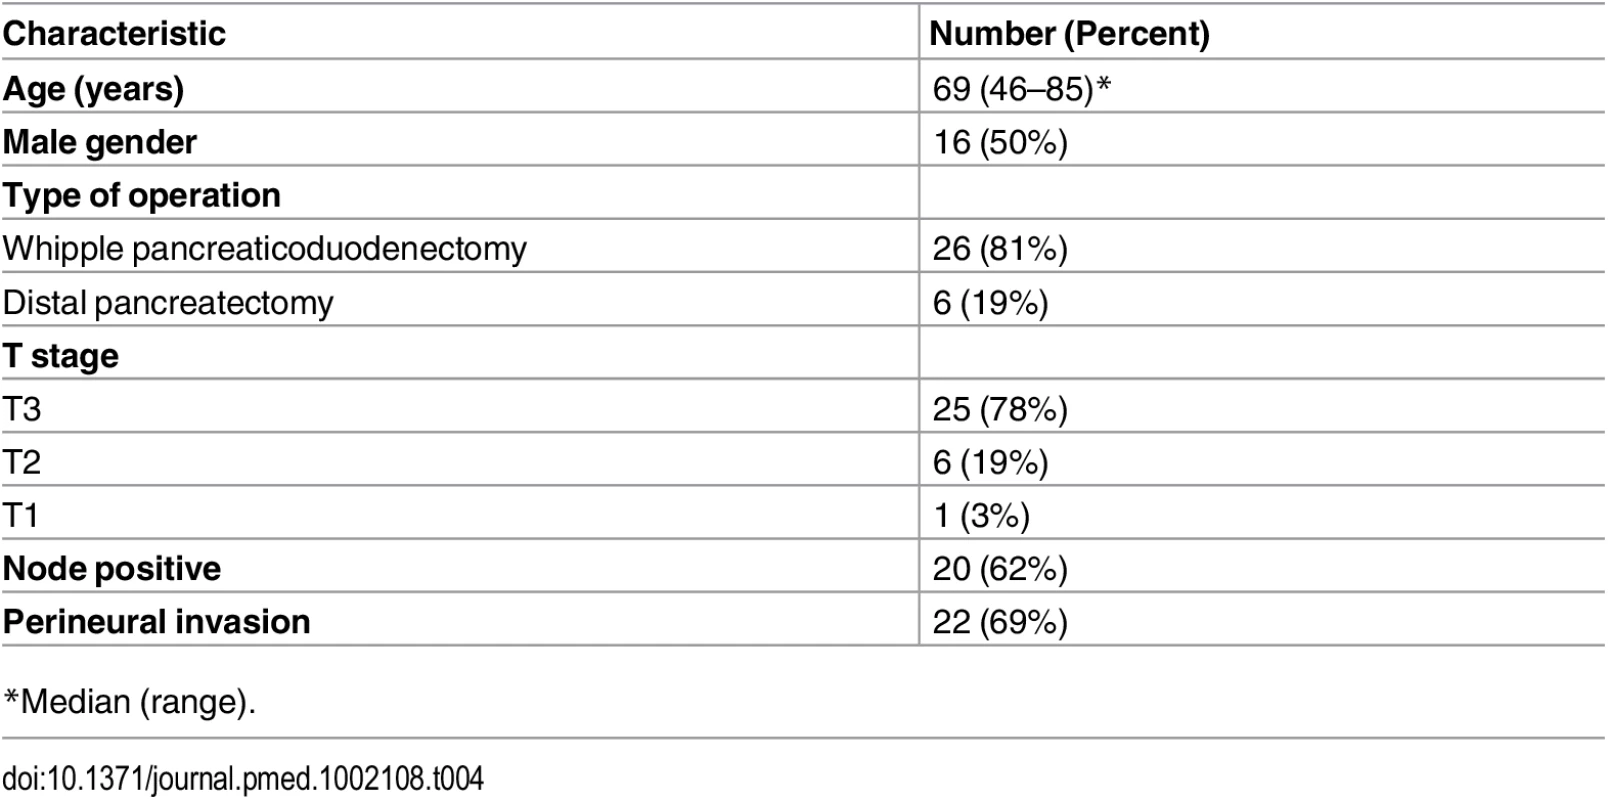 Clinicopathologic characteristics of 32 patients who underwent resection of pancreatic cancer and were prospectively evaluated.